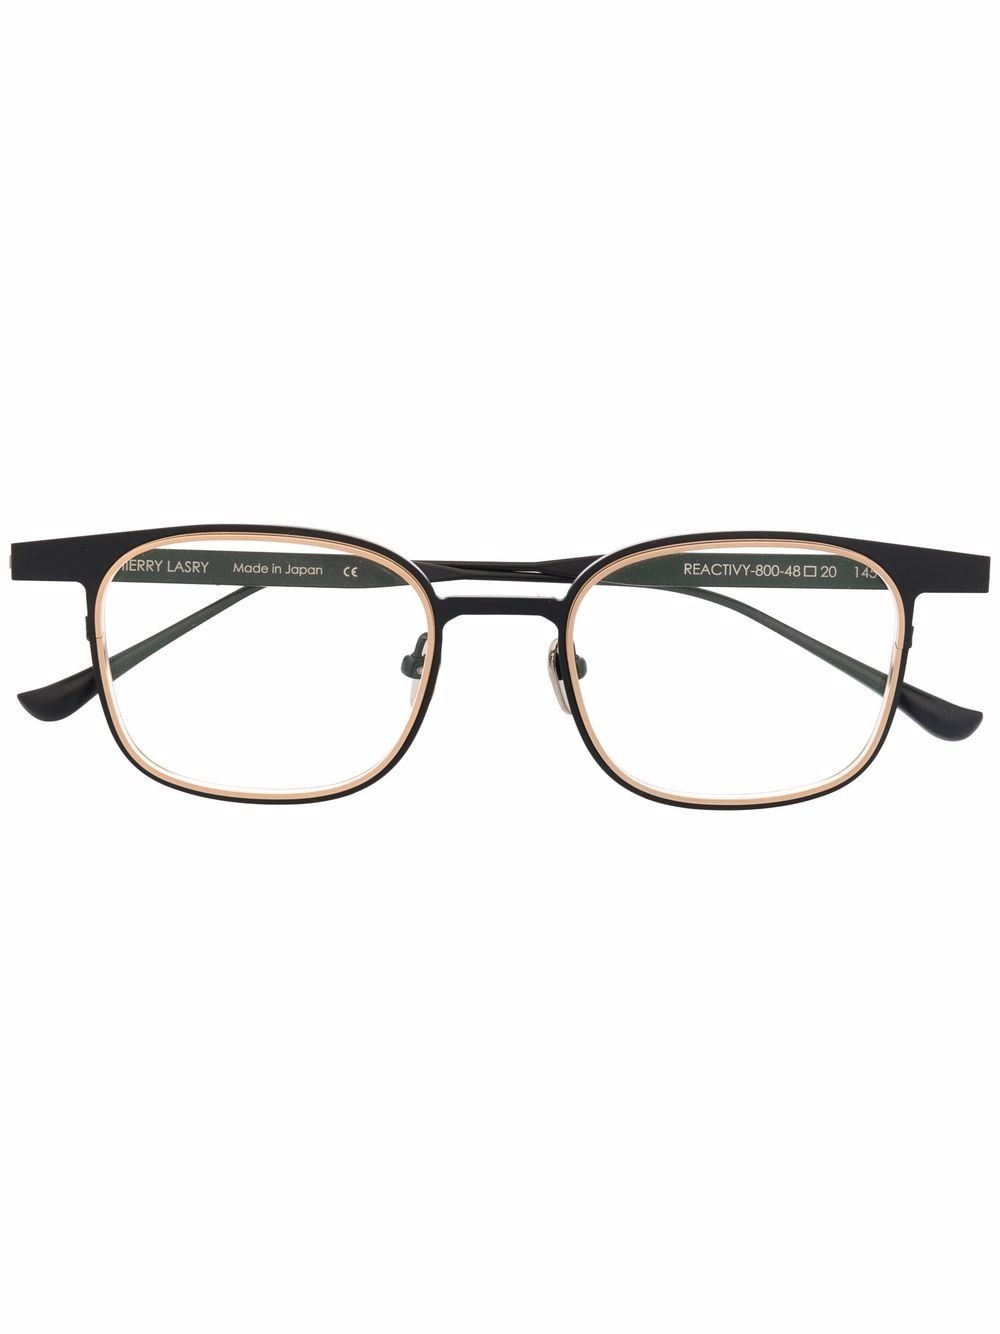 Thierry Lasry square-frame glasses - Black von Thierry Lasry